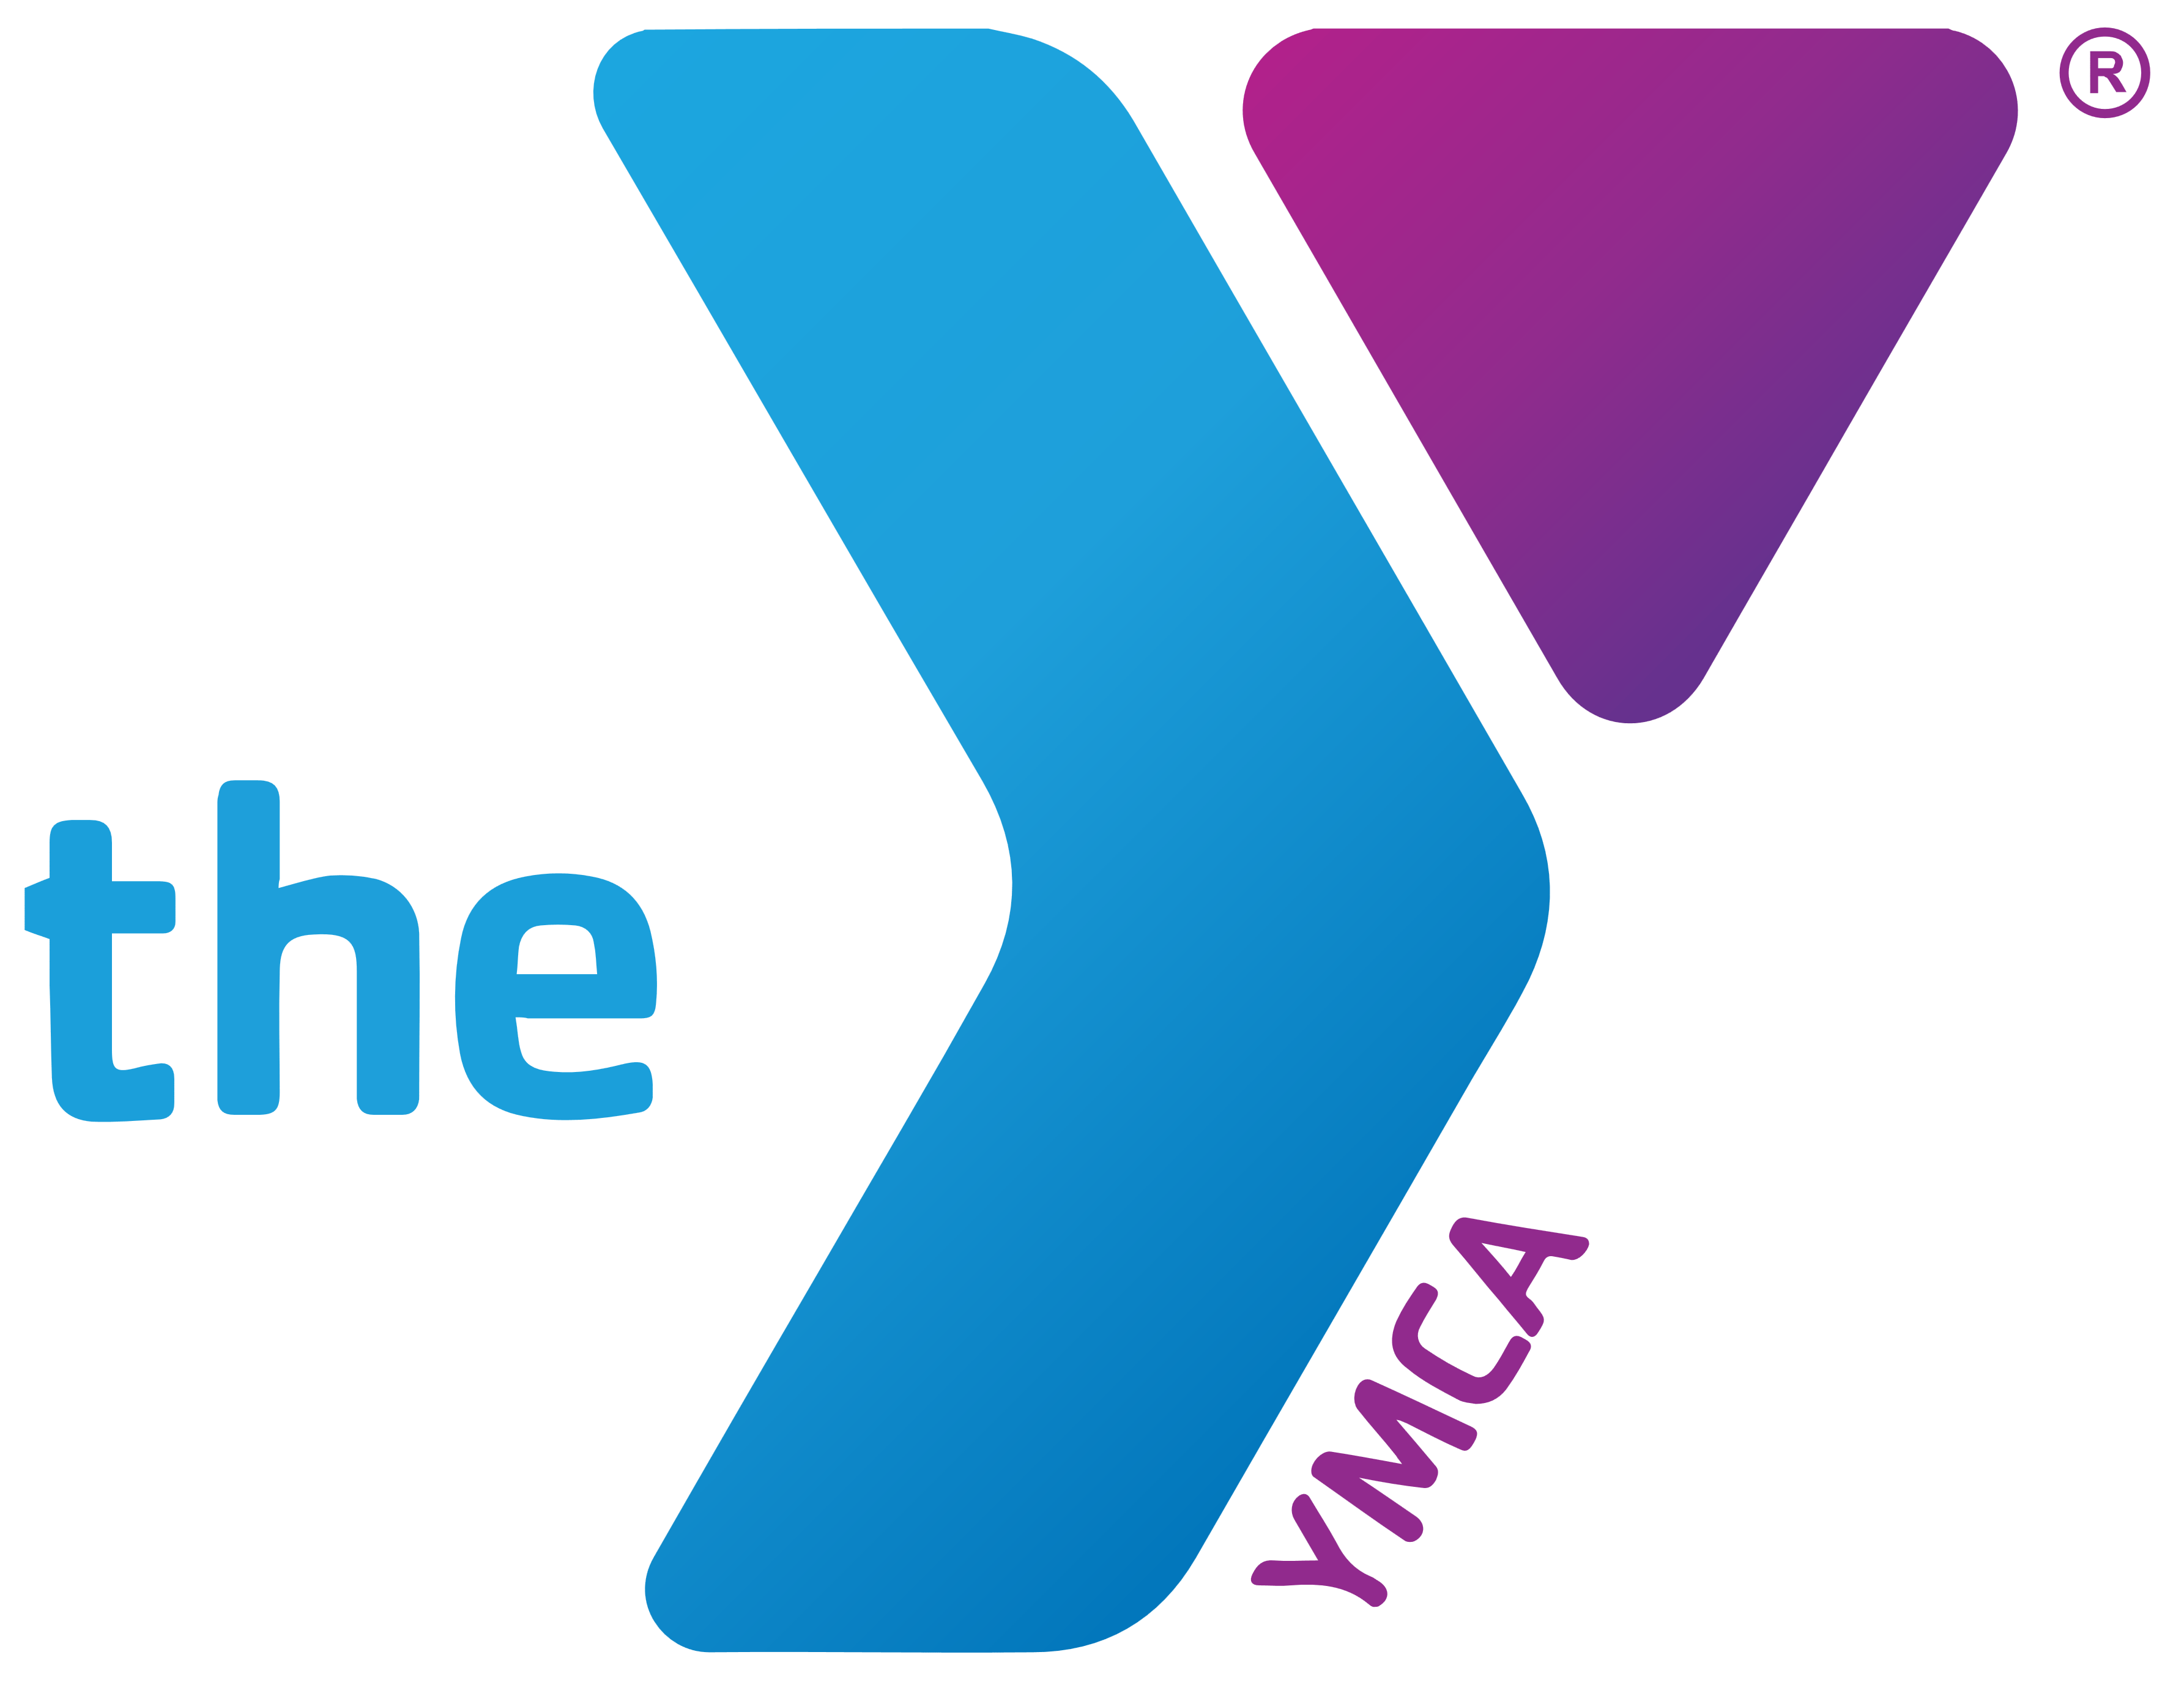 Logo of the YMCA featuring a large blue 'Y' with a smaller 'the' in lowercase letters to the left and 'YMCA' in purple to the right, all against a white background.